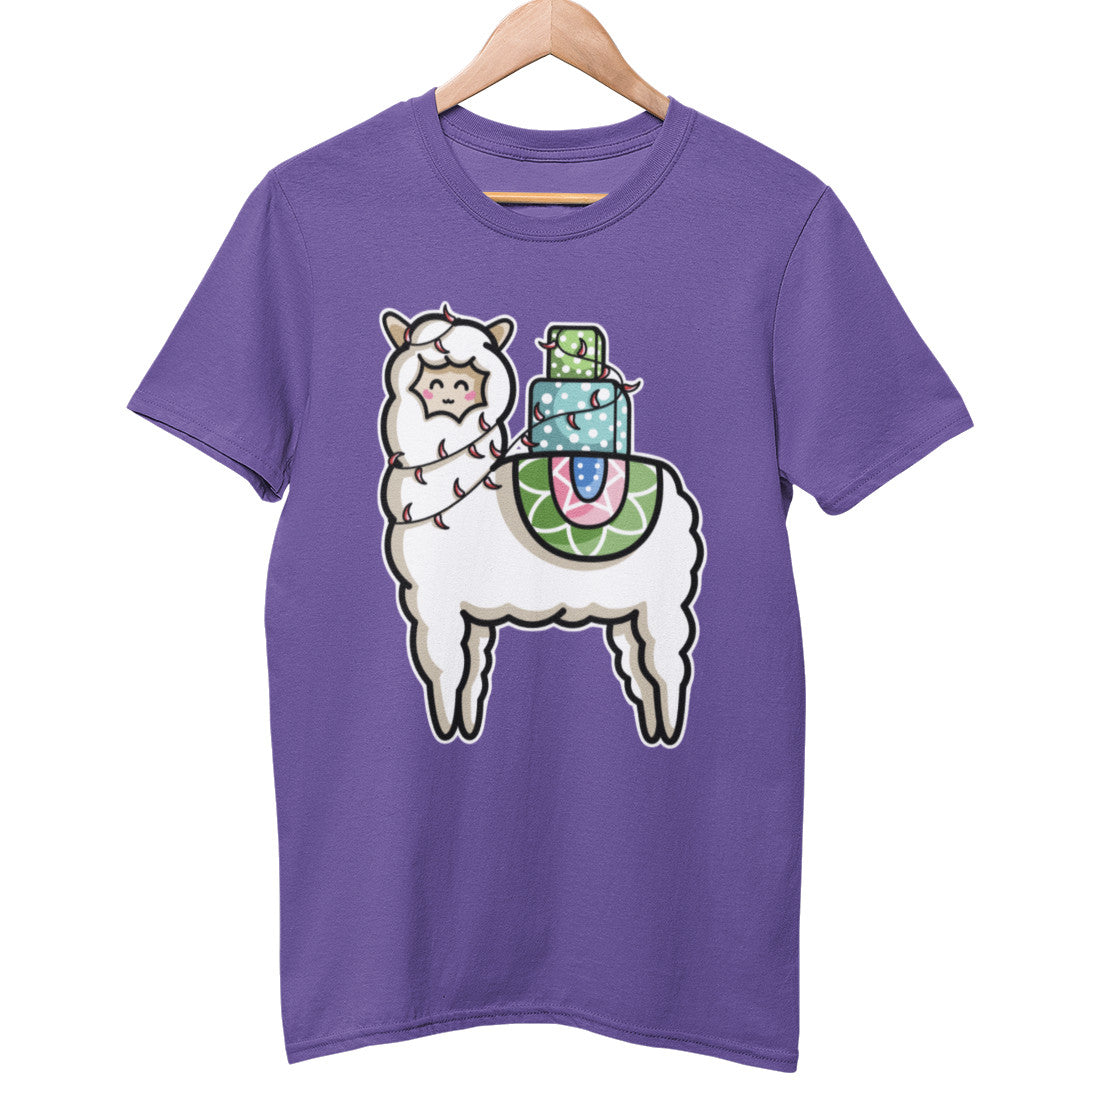 A purple unisex crewneck t-shirt on a wooden hanger with a design on its chest of a white llama with a stack of presents on its back and a string of chilli lights